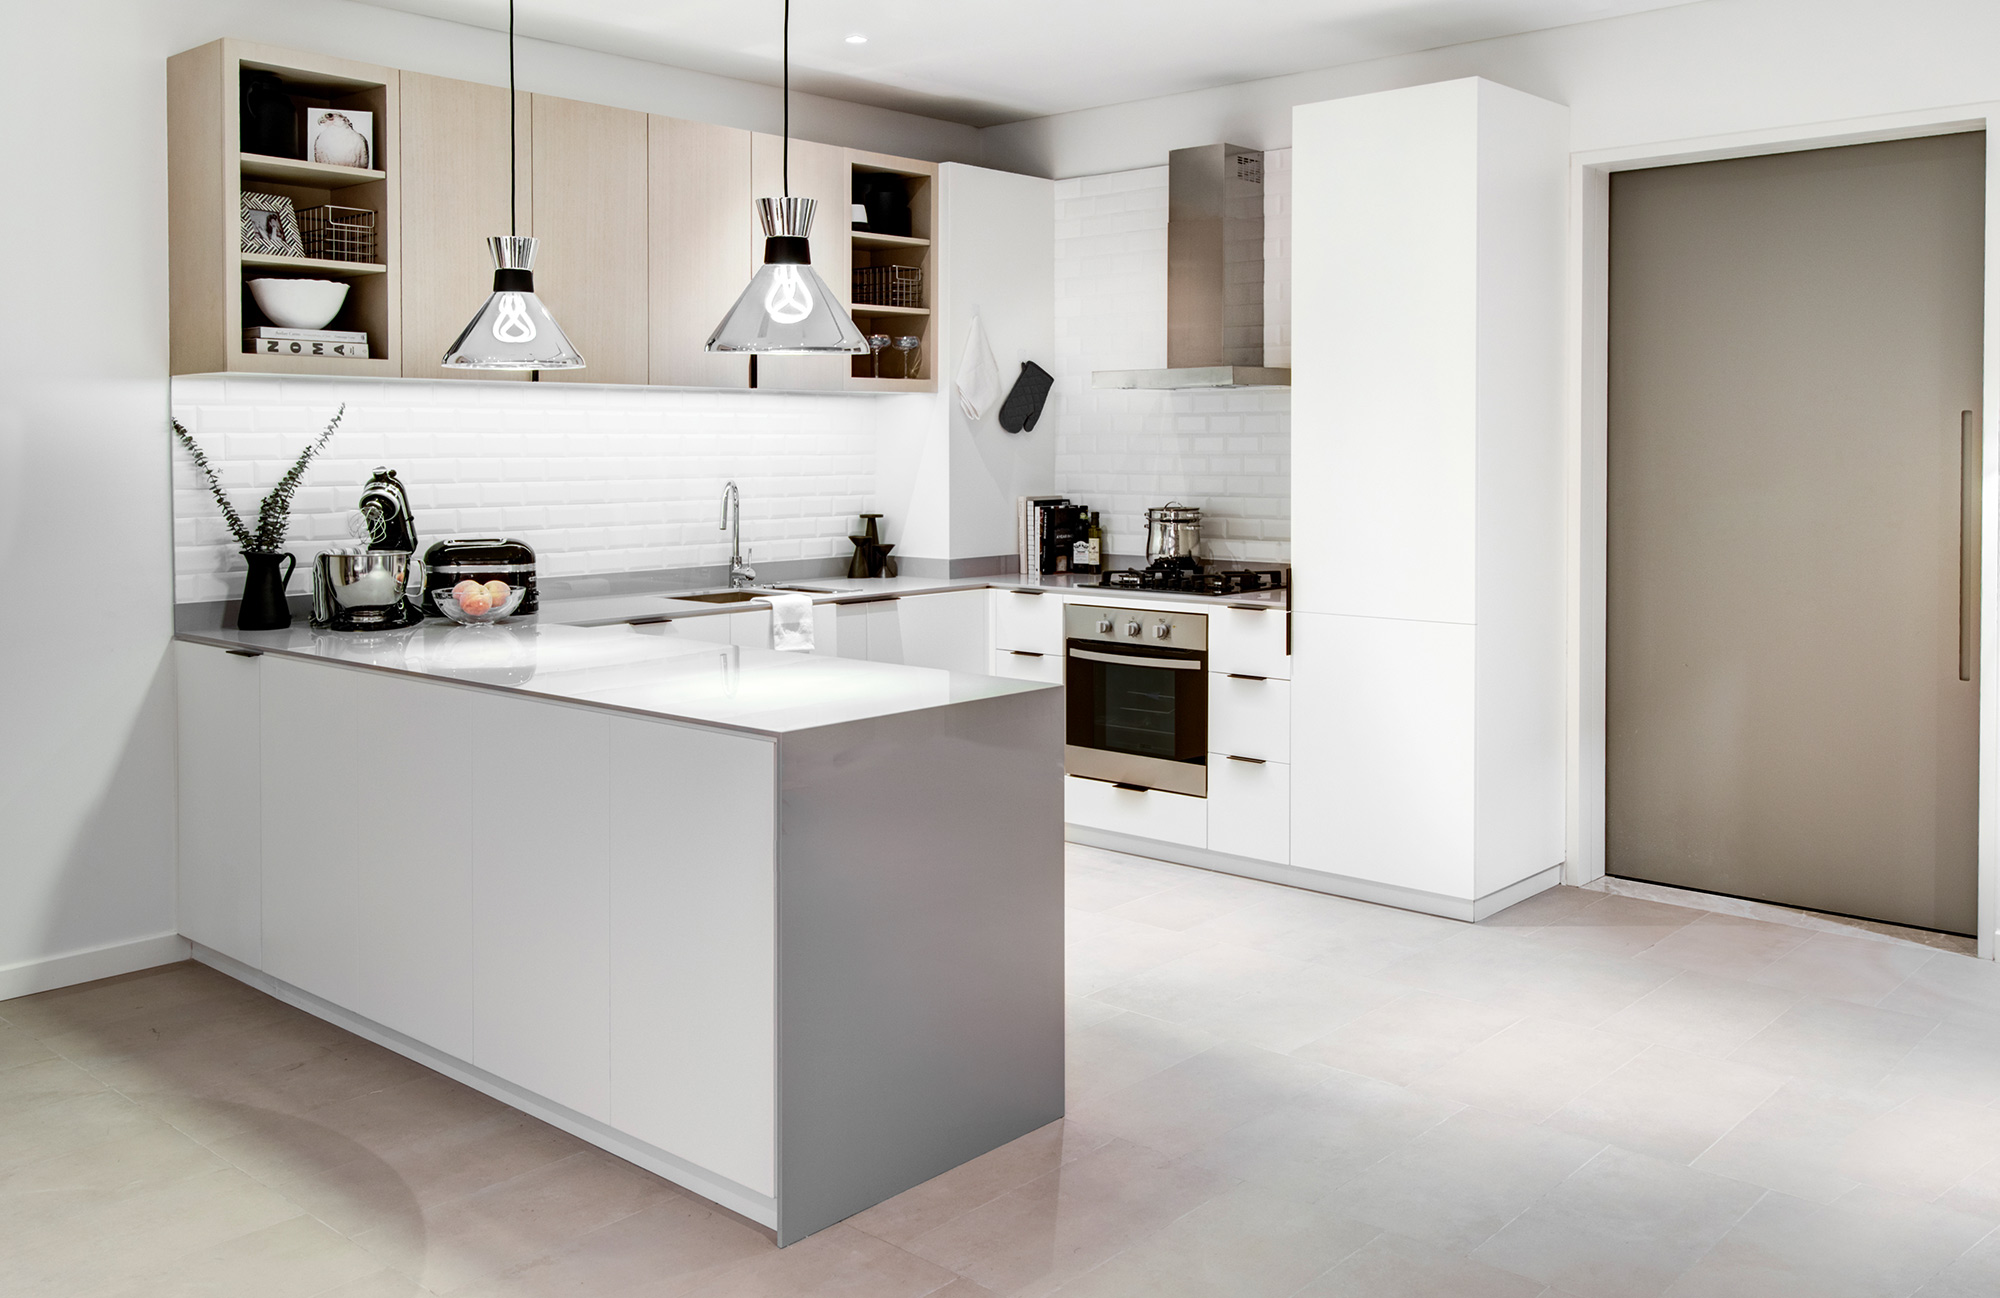 Image of Belgravia Heights I Show Apartment Kitchen in Inspiration - Cosentino